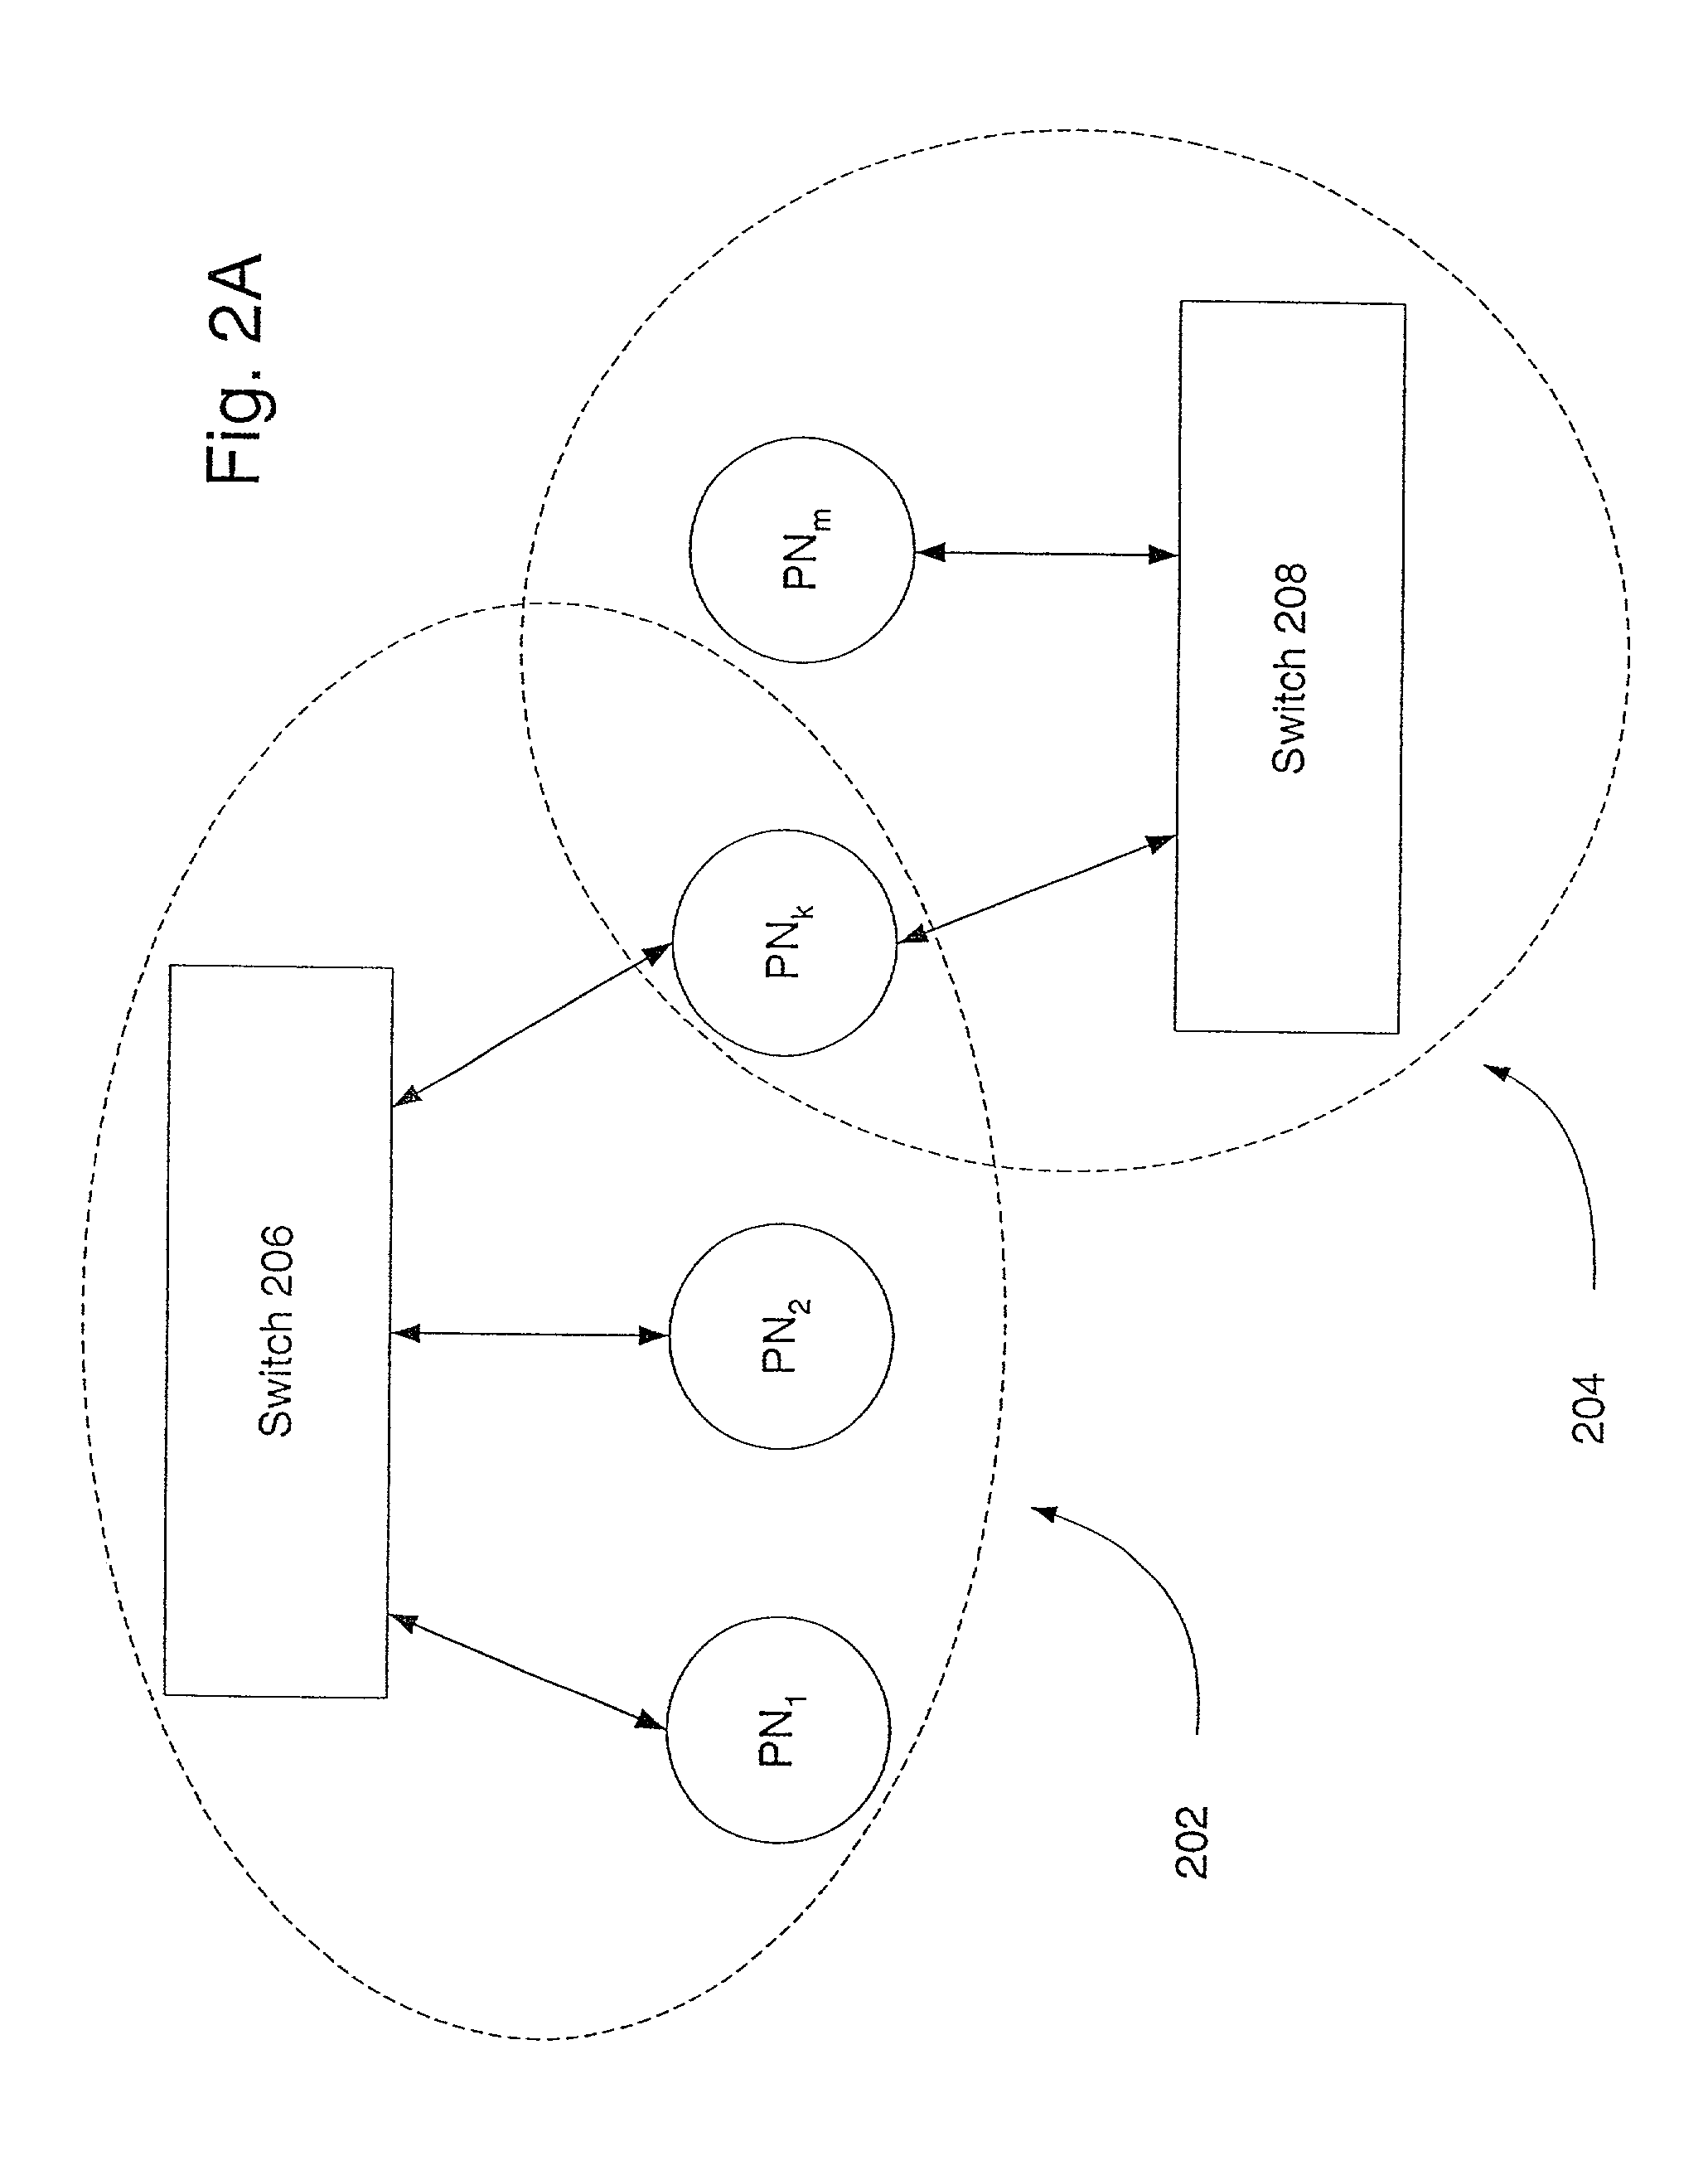 Service clusters and method in a processing system with failover capability